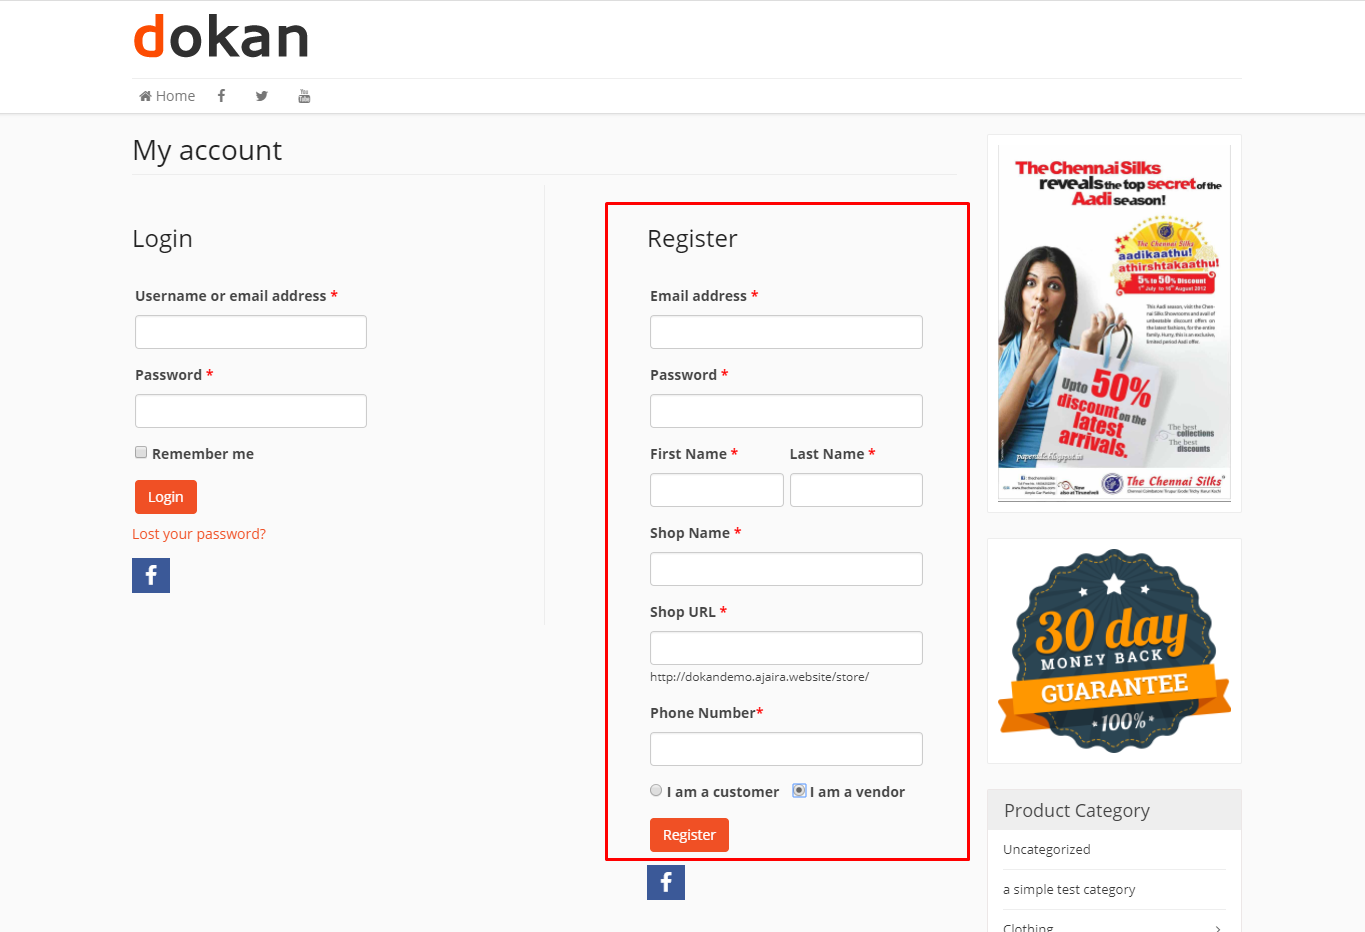 This is a screenshot of the dokan registration form-Online Cosmetics Store